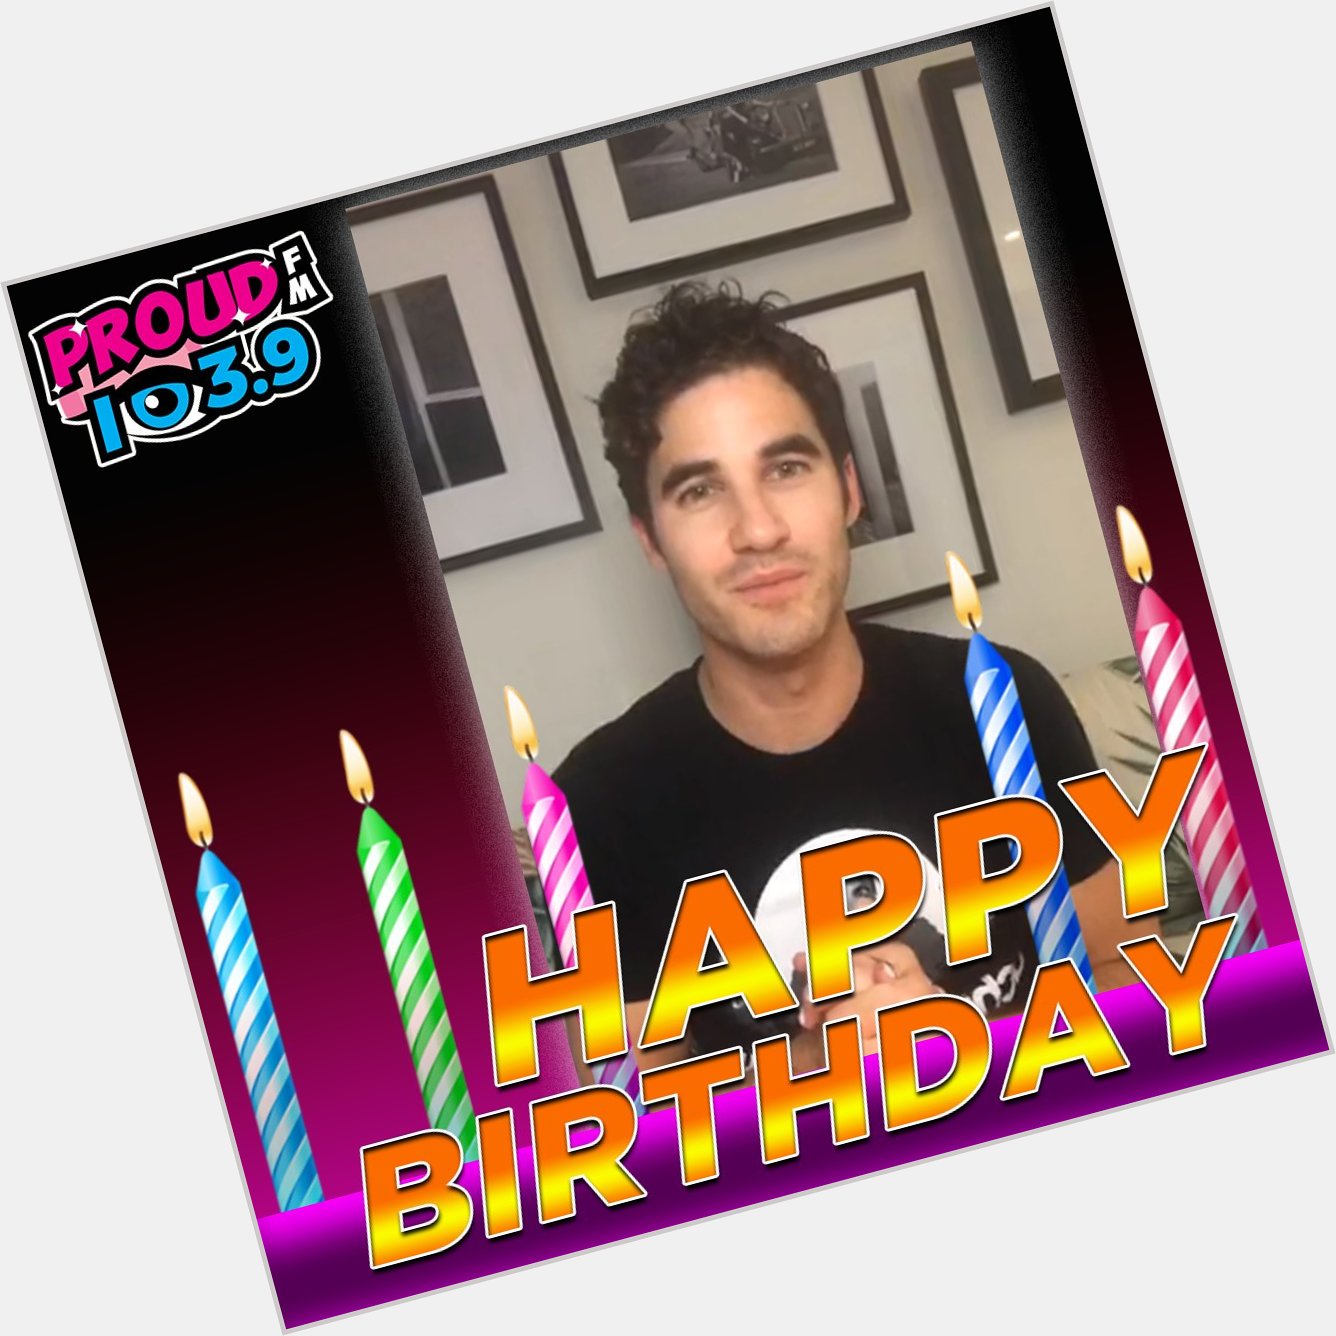 HAPPY 34TH BIRTHDAY TO DARREN CRISS from all us at 1039 PROUD FM Toronto! 